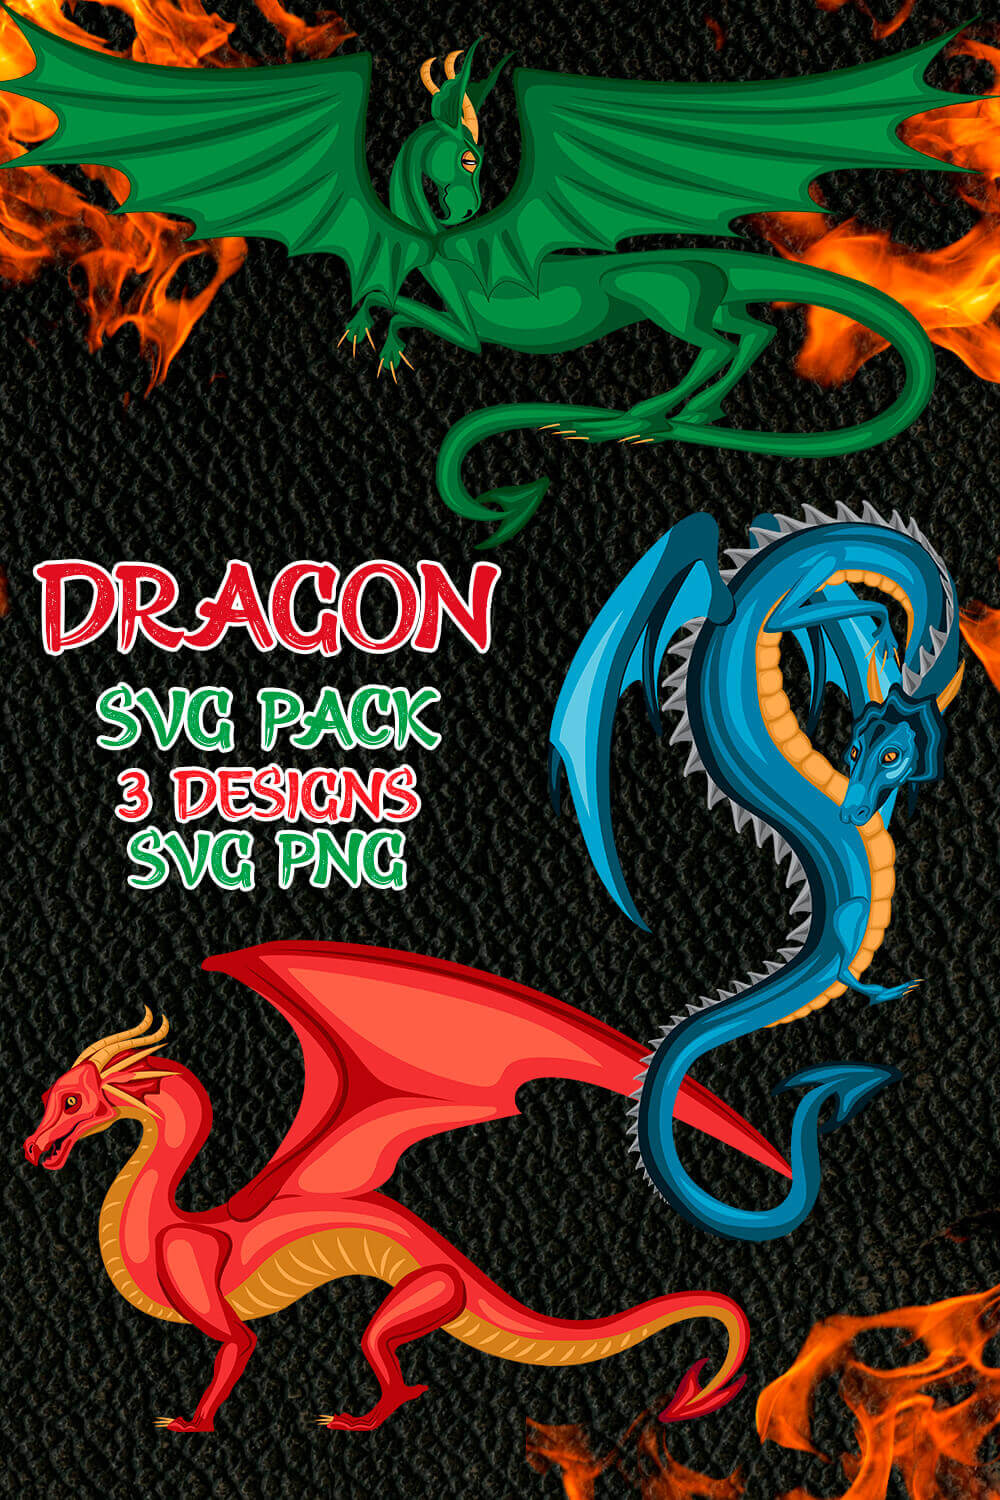 Dragon and a dragon with flames on a black background.